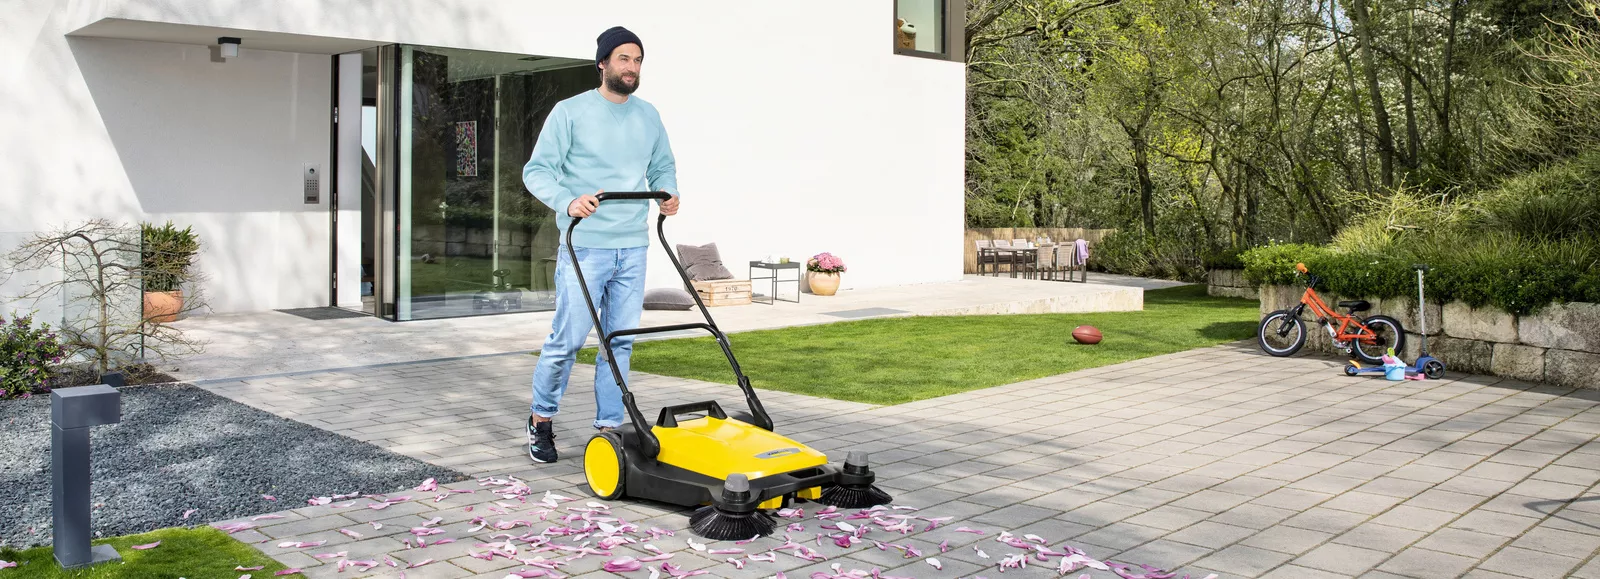 A man cleans paving stones with a Kärcher Sweeper in spring